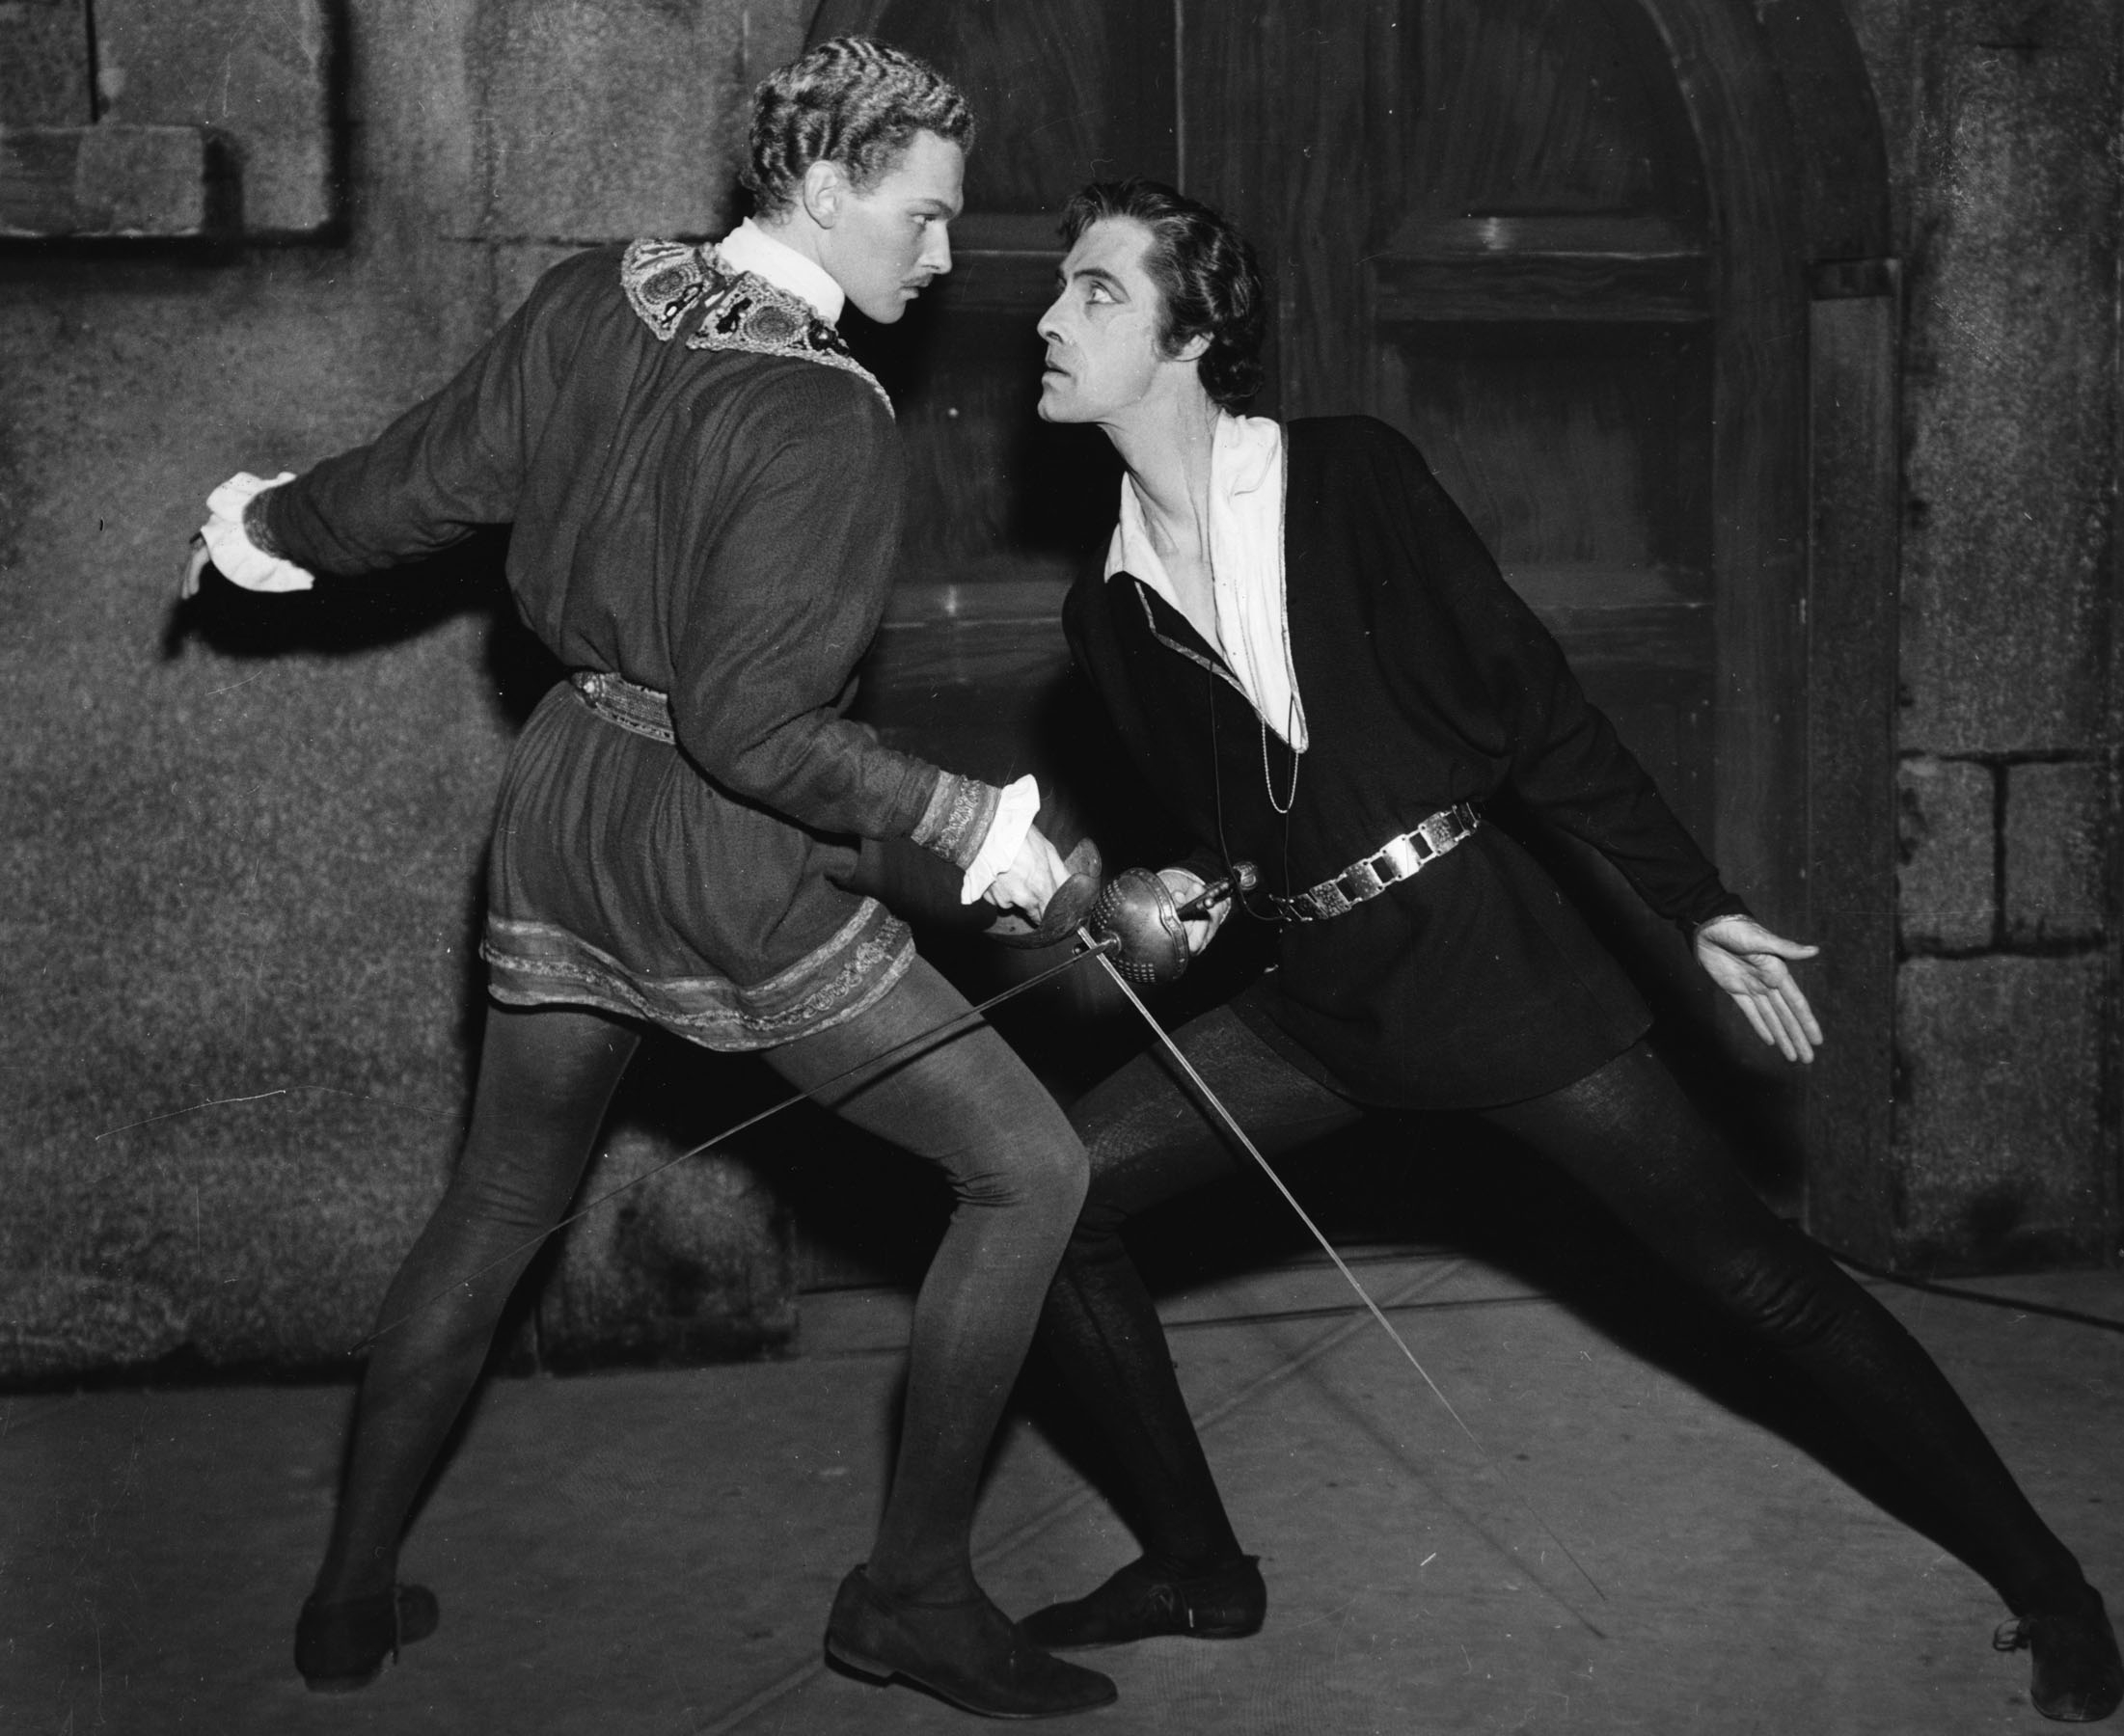 Original caption reads, "Robert Duke as Laertes (left) and John Carradine as Hamlet (right) in a production of Shakespeare’s play, circa 1943."